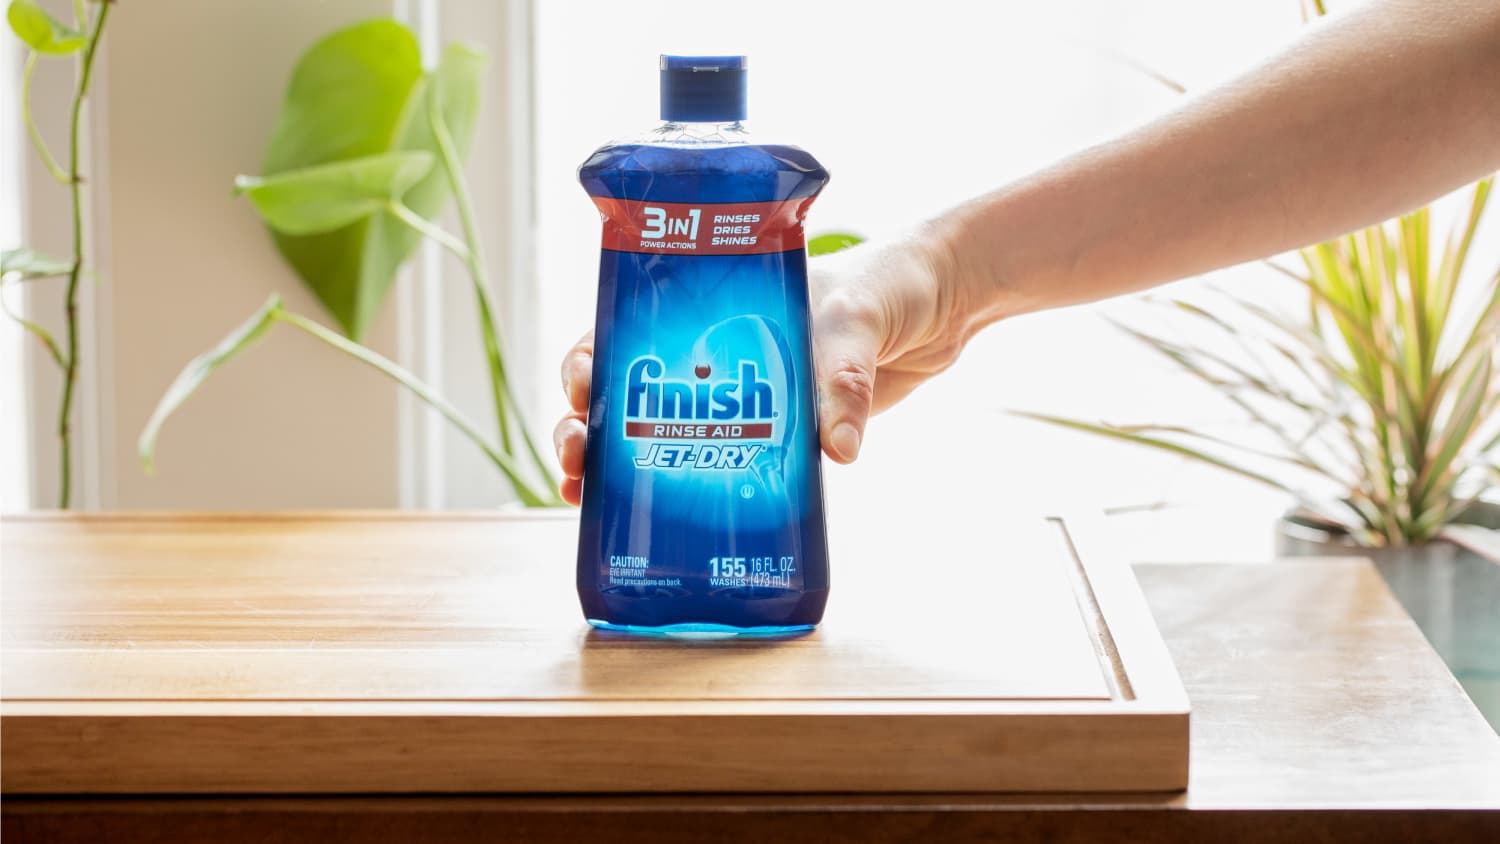 Finish® Jetdry Hard Water Stain Removal Rinse, 8.45 fl oz - Foods Co.